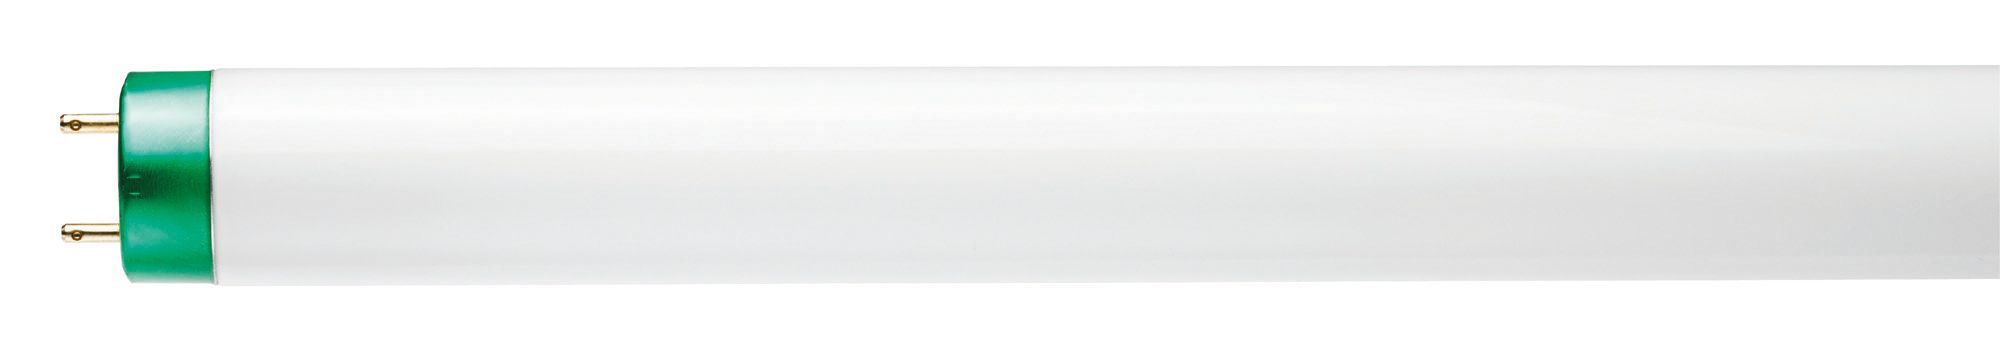 28095-8 (F17T8/TL841/PLUS/ALTO) Straight Tube Fluorescent Lamp Philips Lighting;Signify Lamps